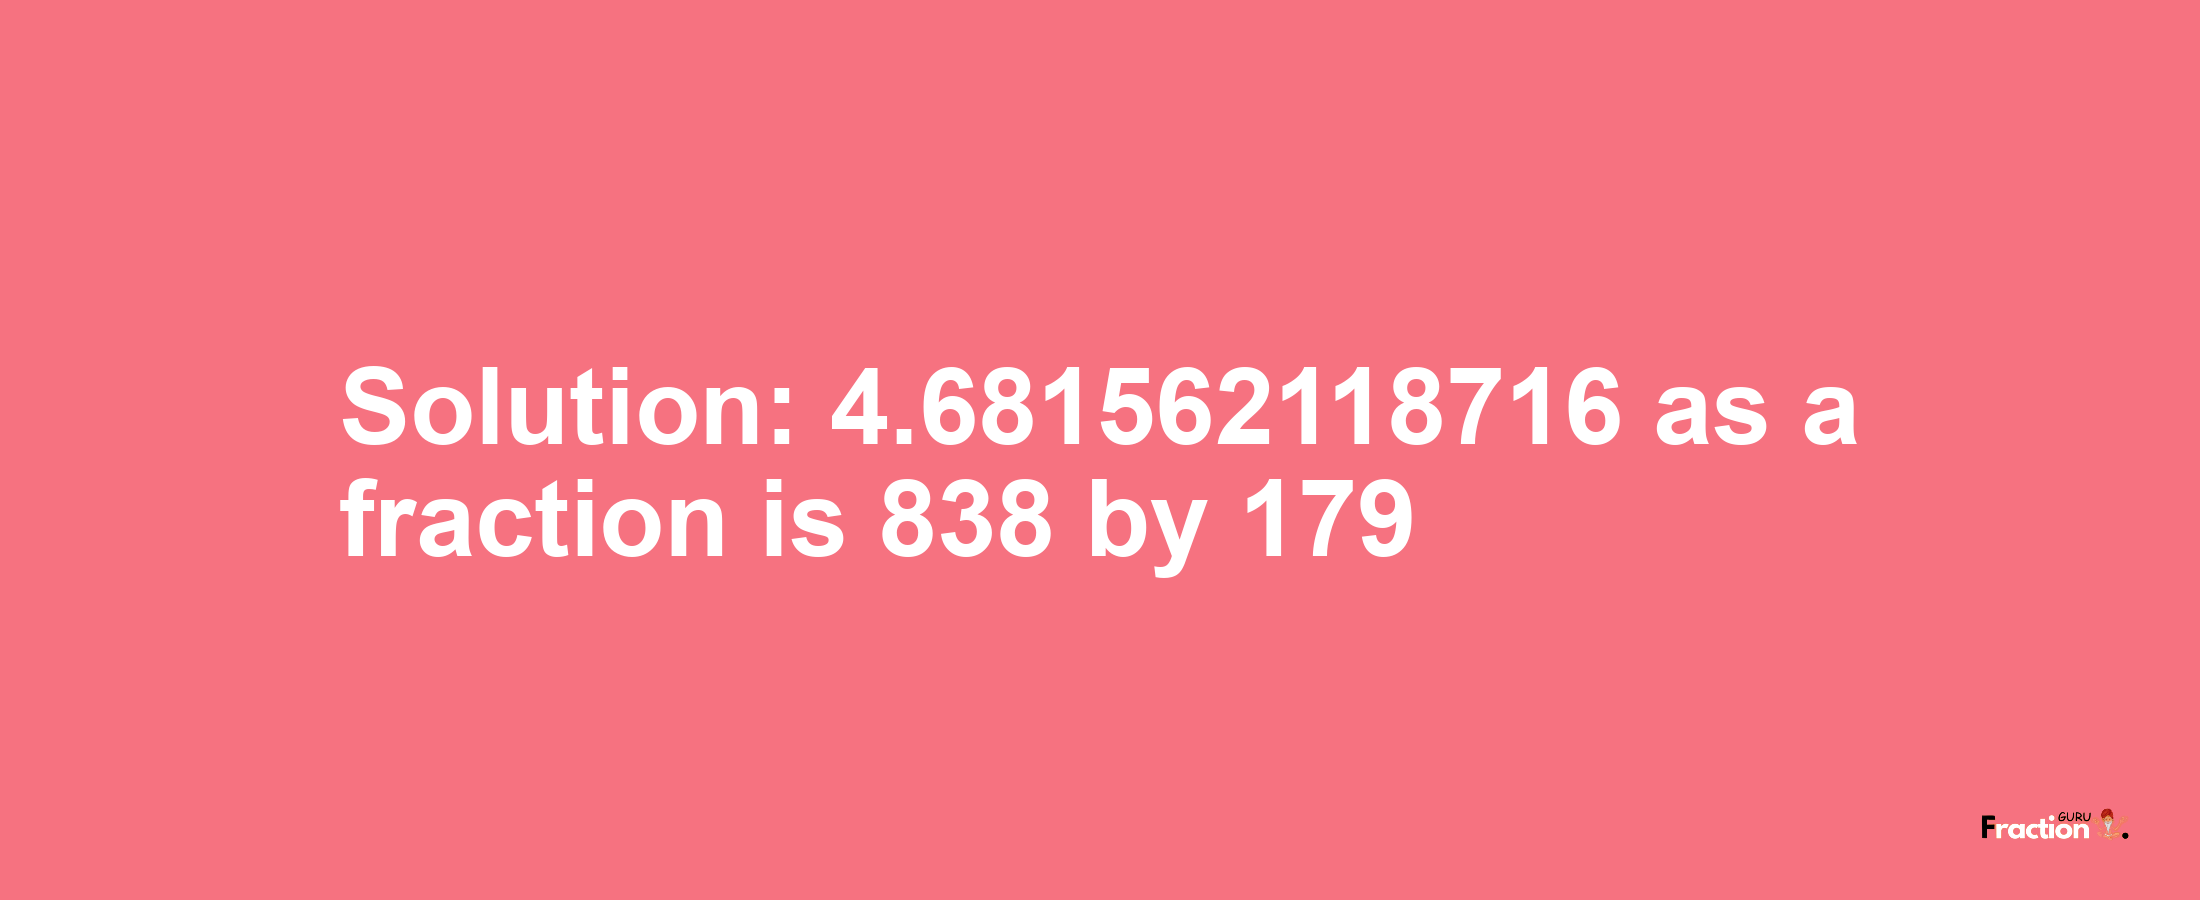 Solution:4.681562118716 as a fraction is 838/179